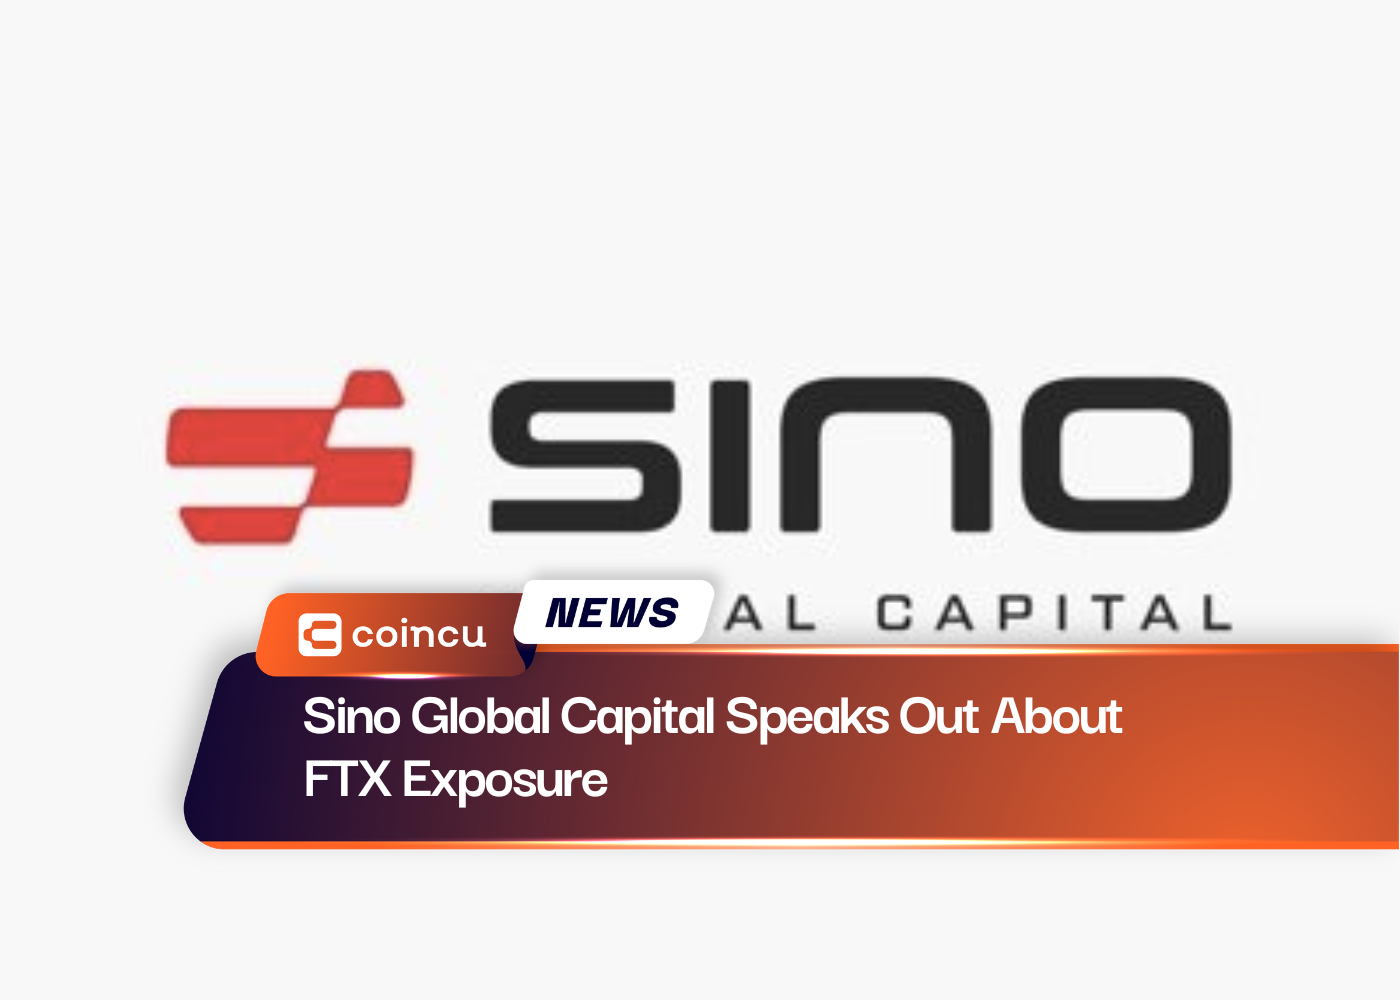 Sino Global Capital Speaks Out About FTX Exposure